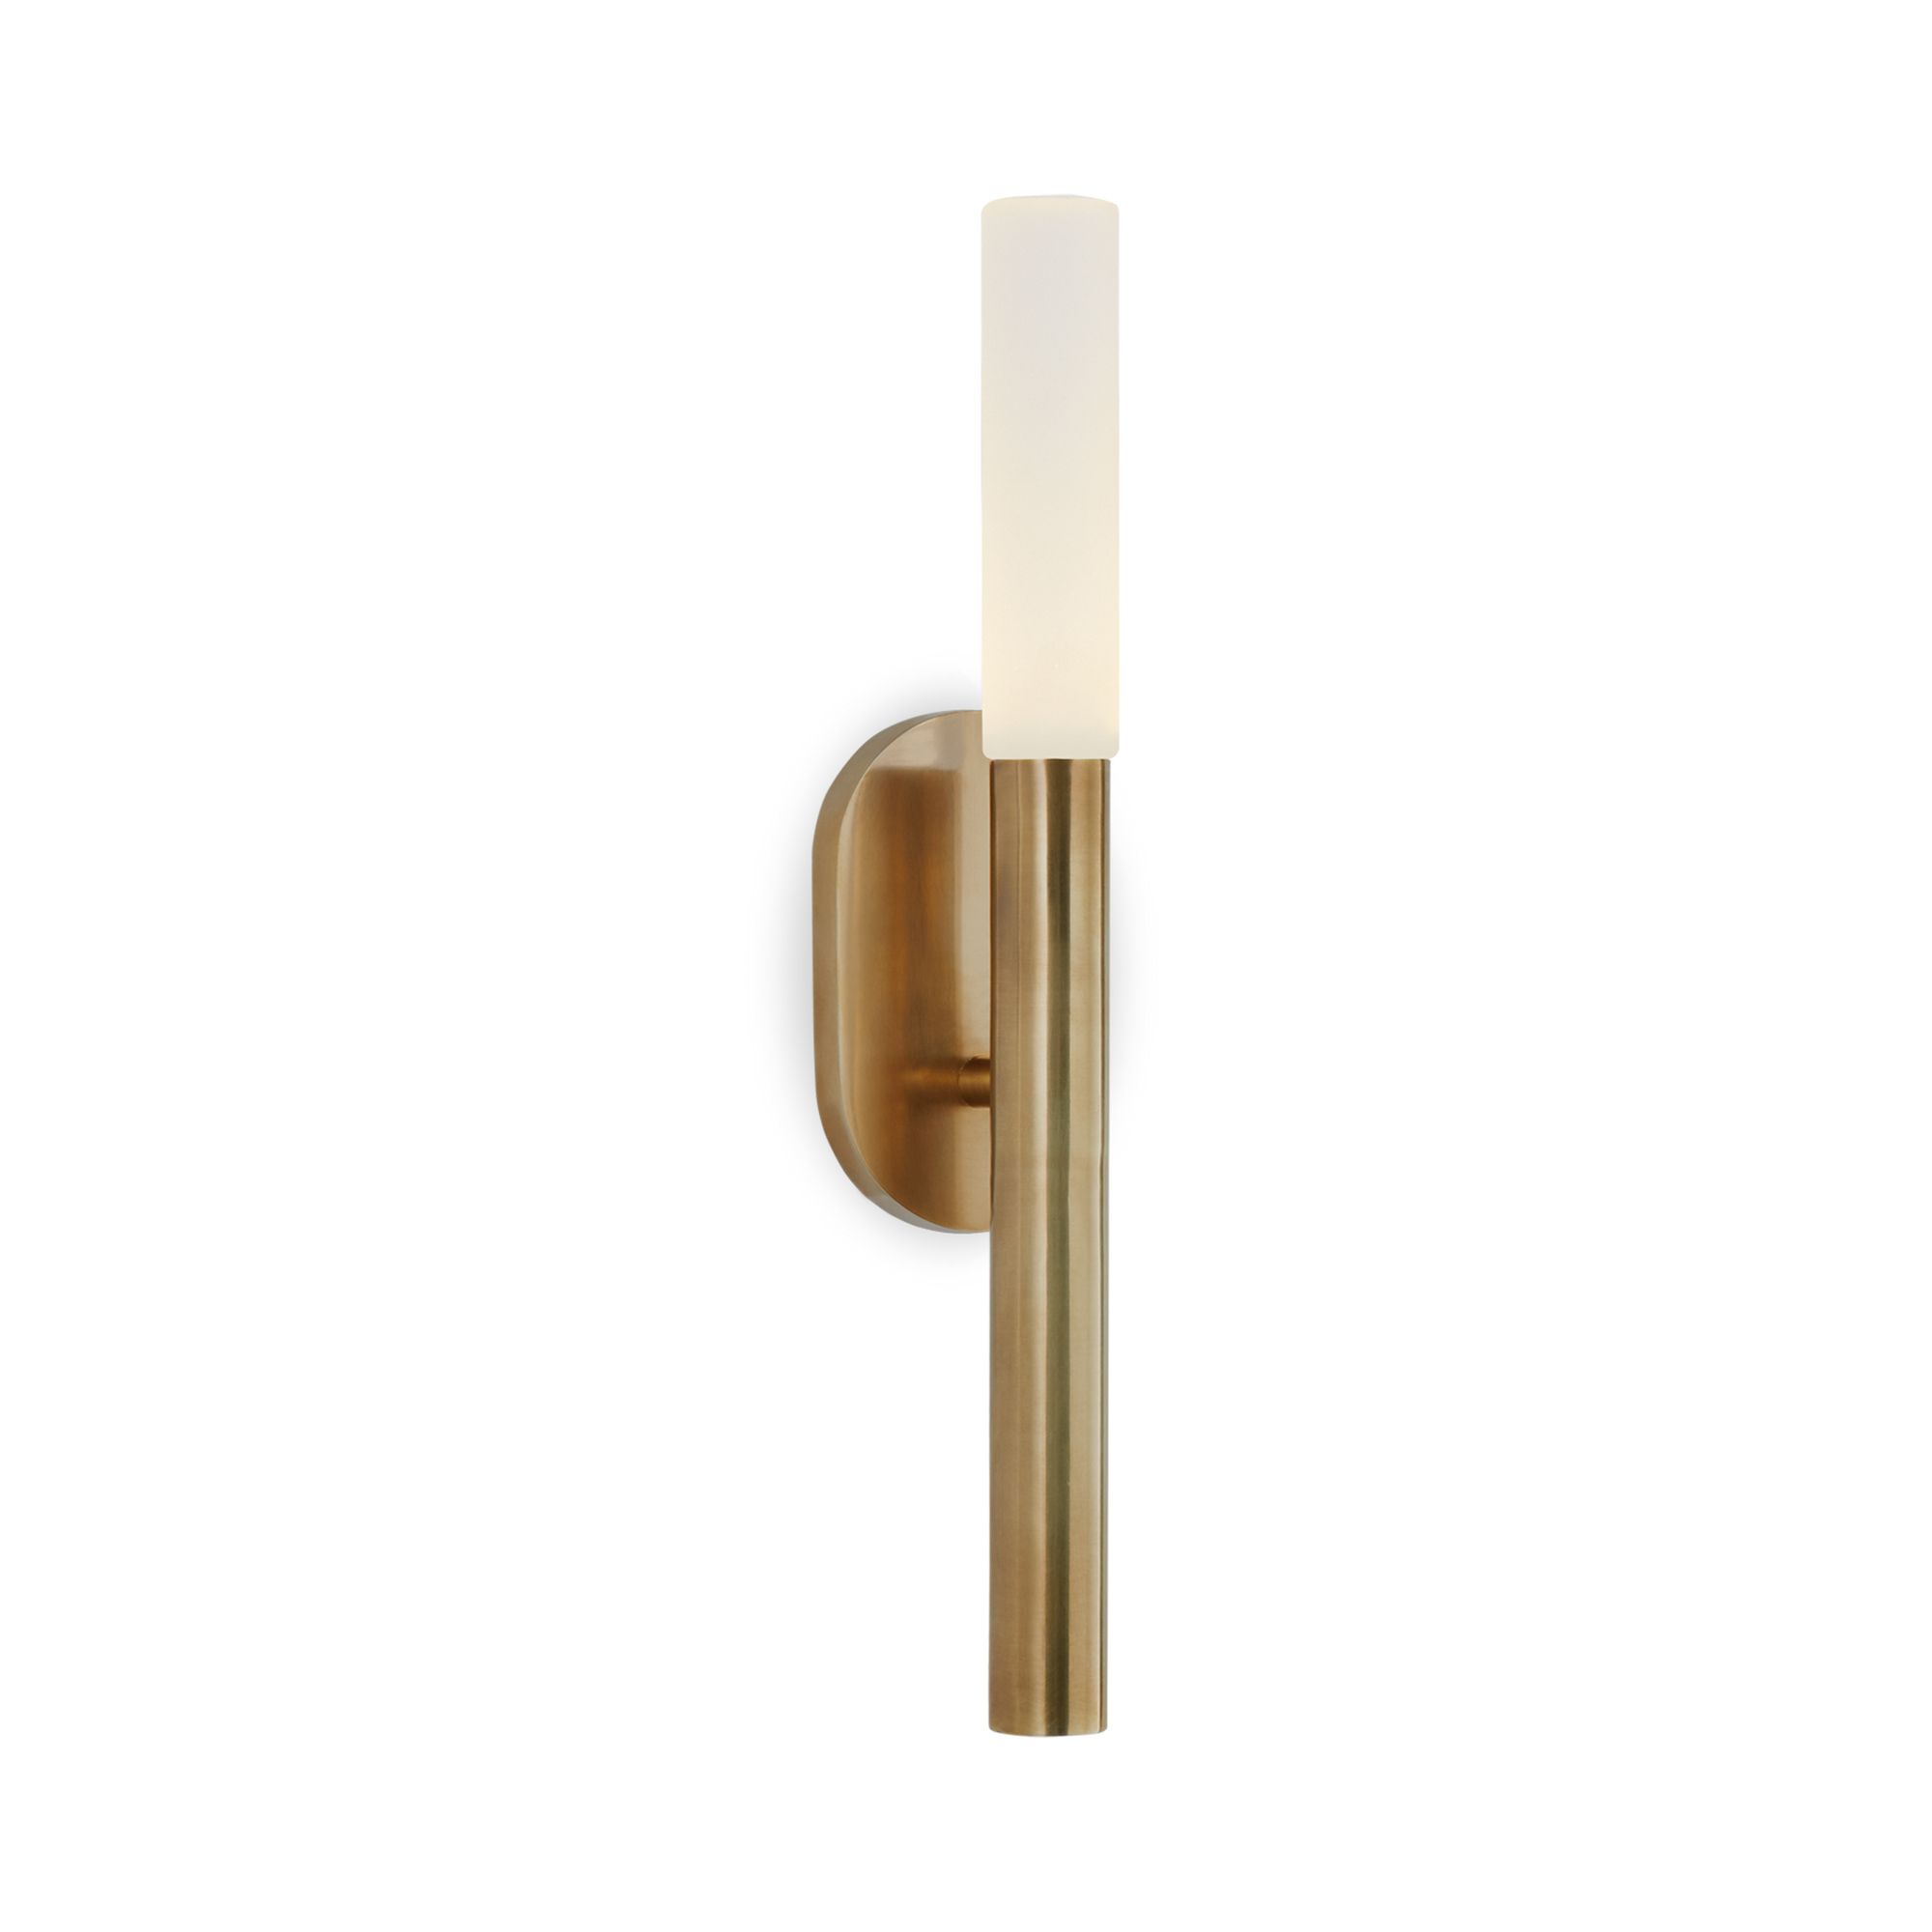 The Rousseau Small Sconce features a distinctive design and soulful vibe.